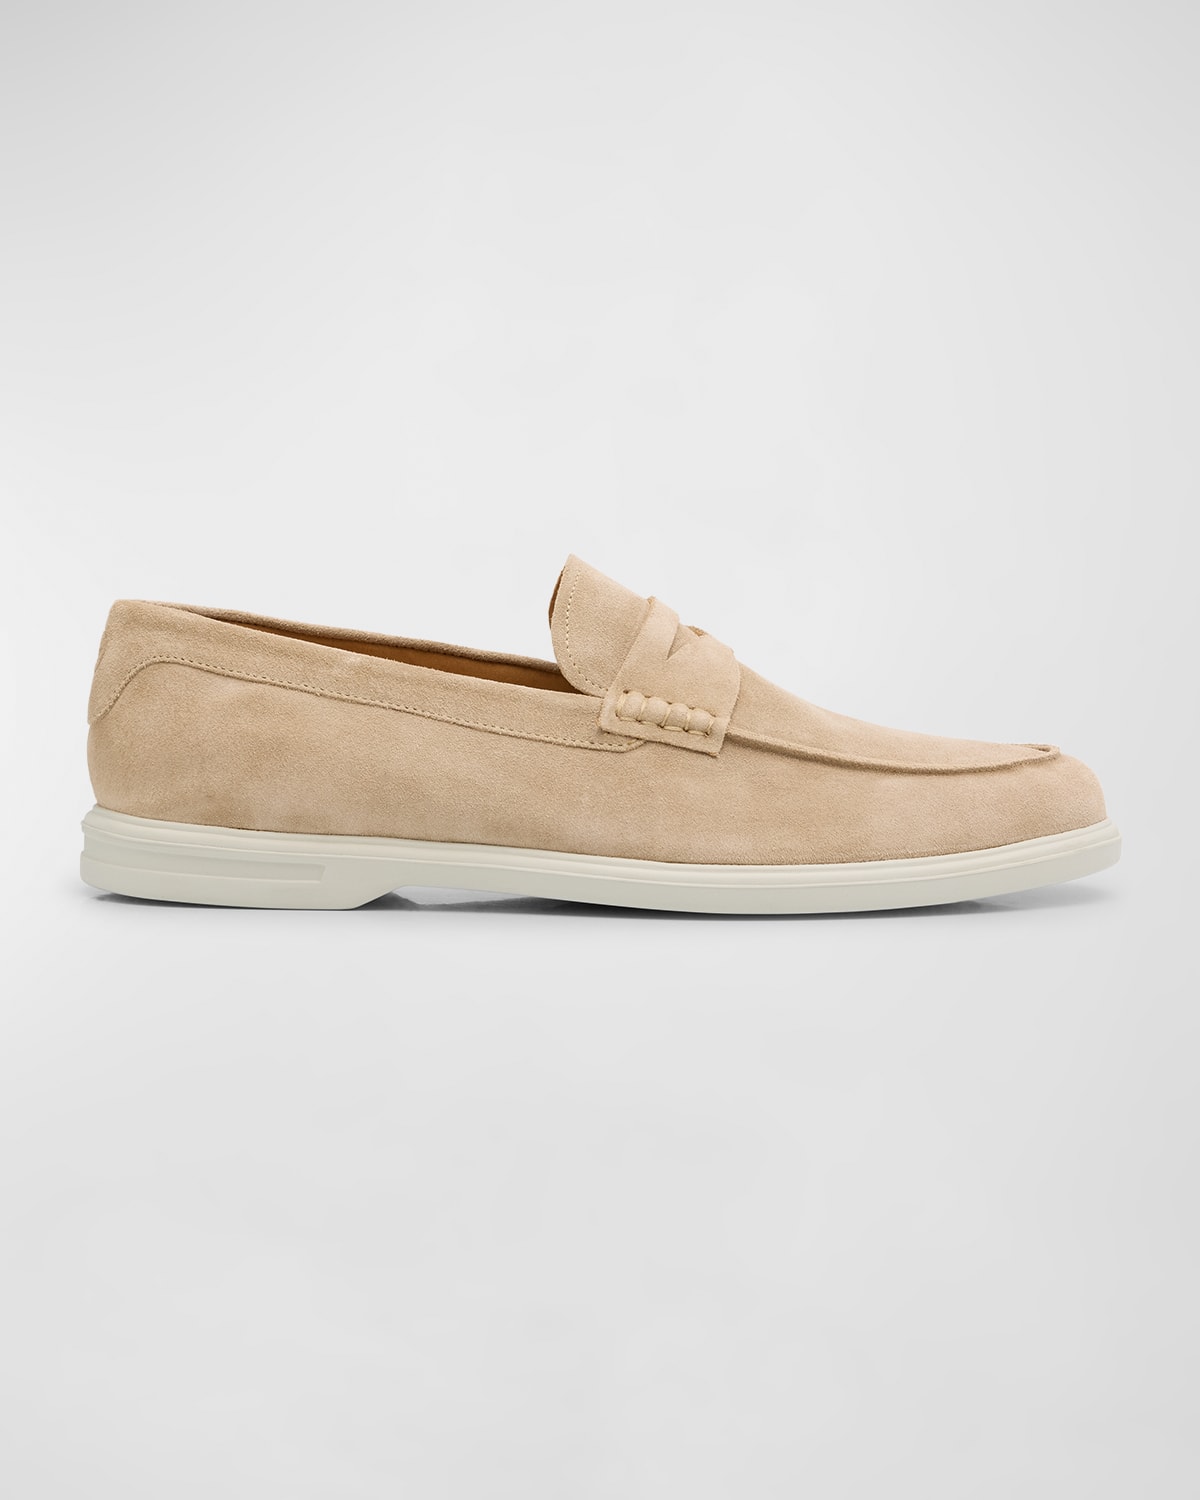 Shop Peter Millar Men's Excursionist Suede Penny Loafers In Sand